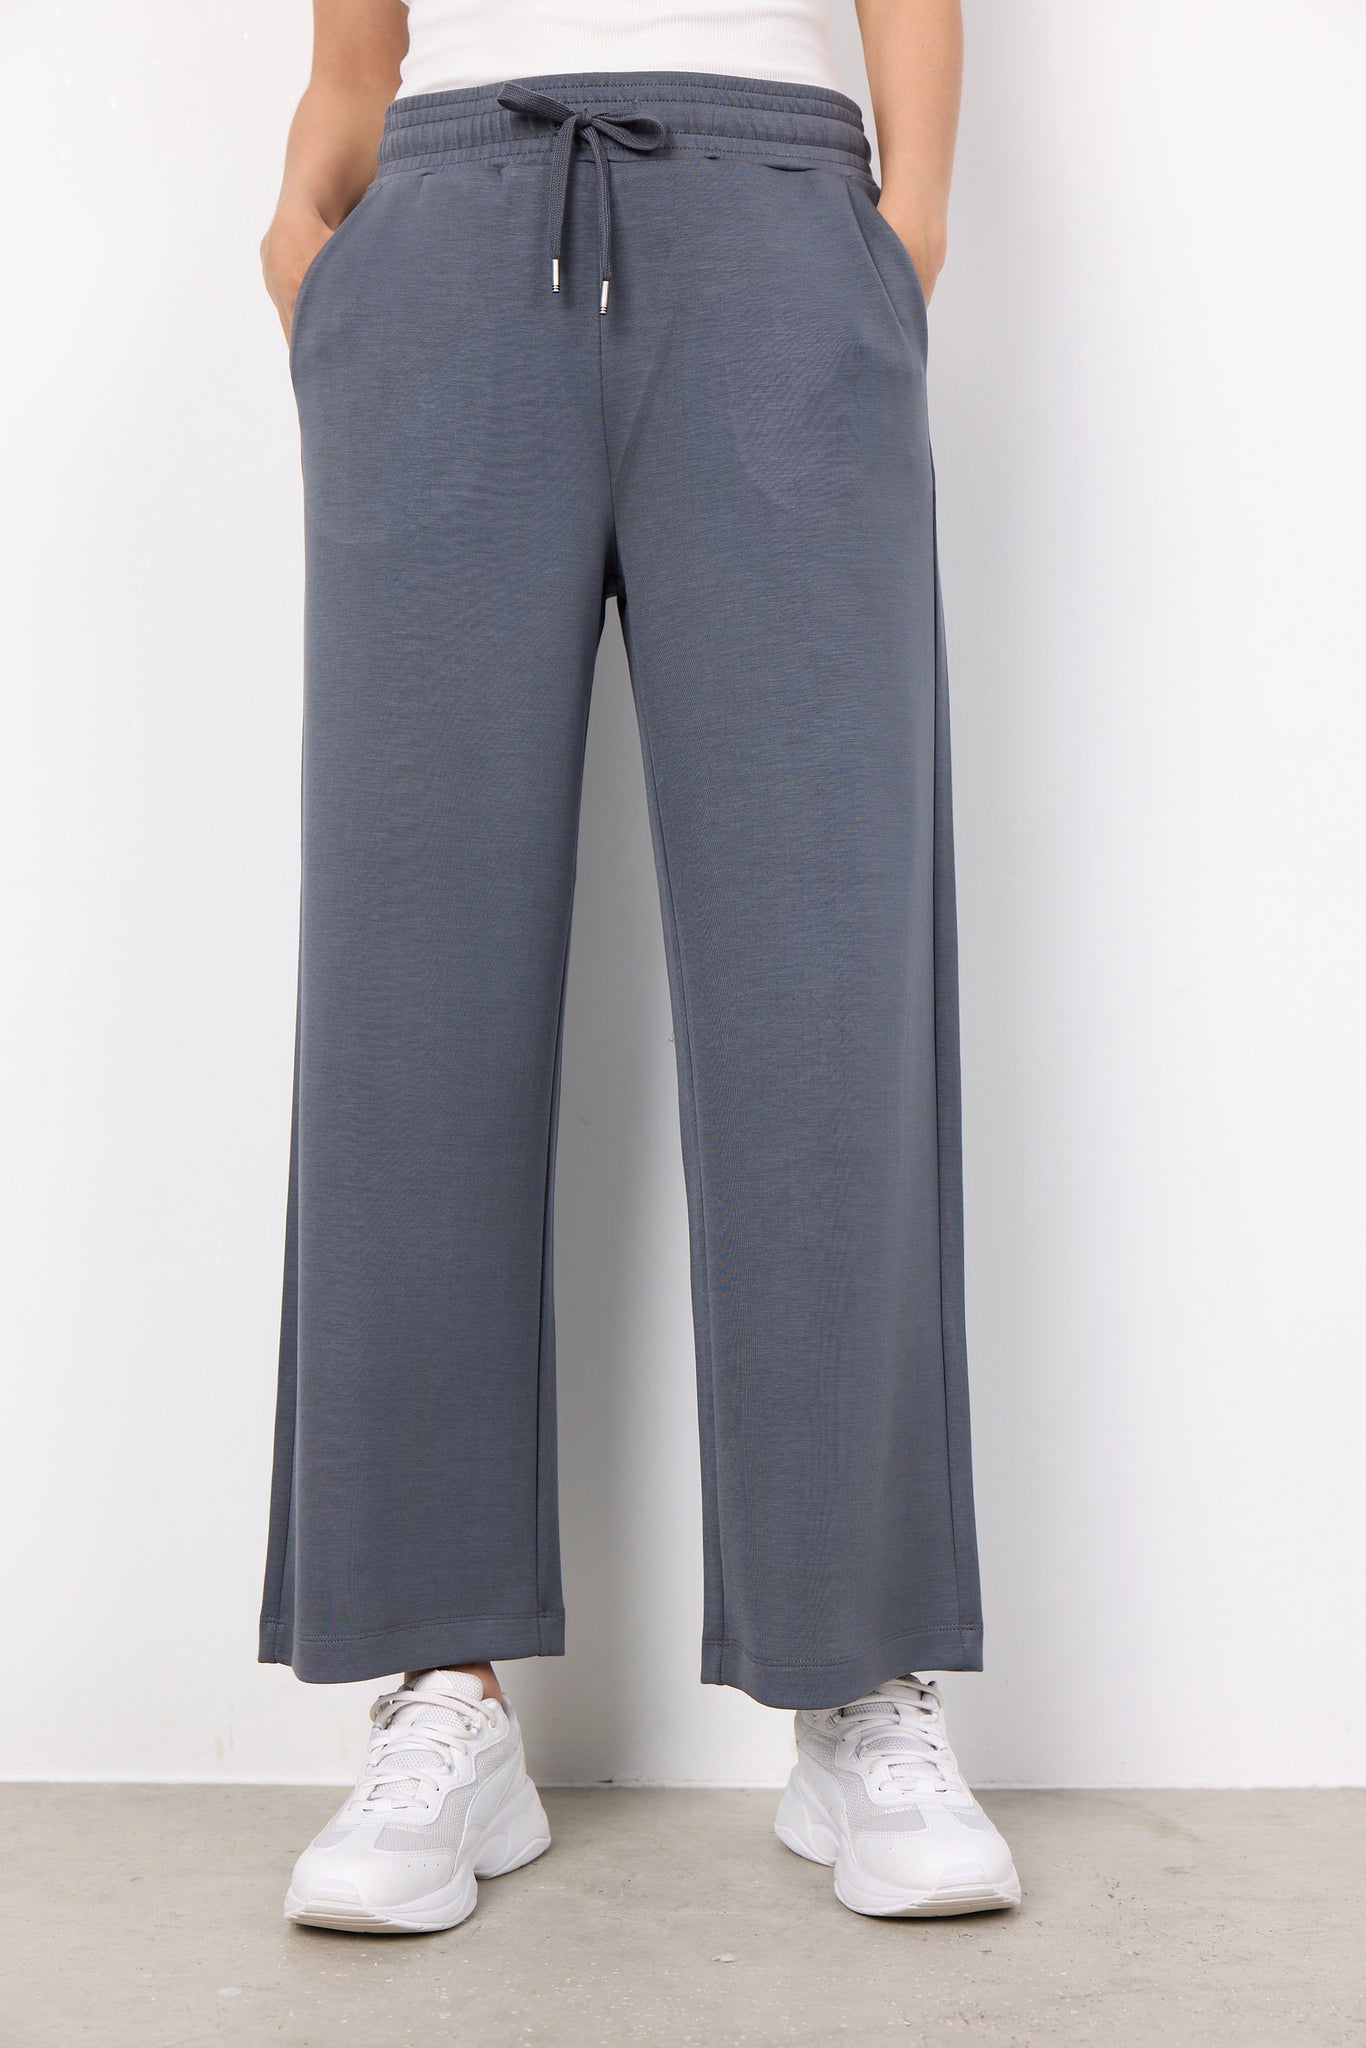 Soyaconcept Wide Leg Joggers in Grey